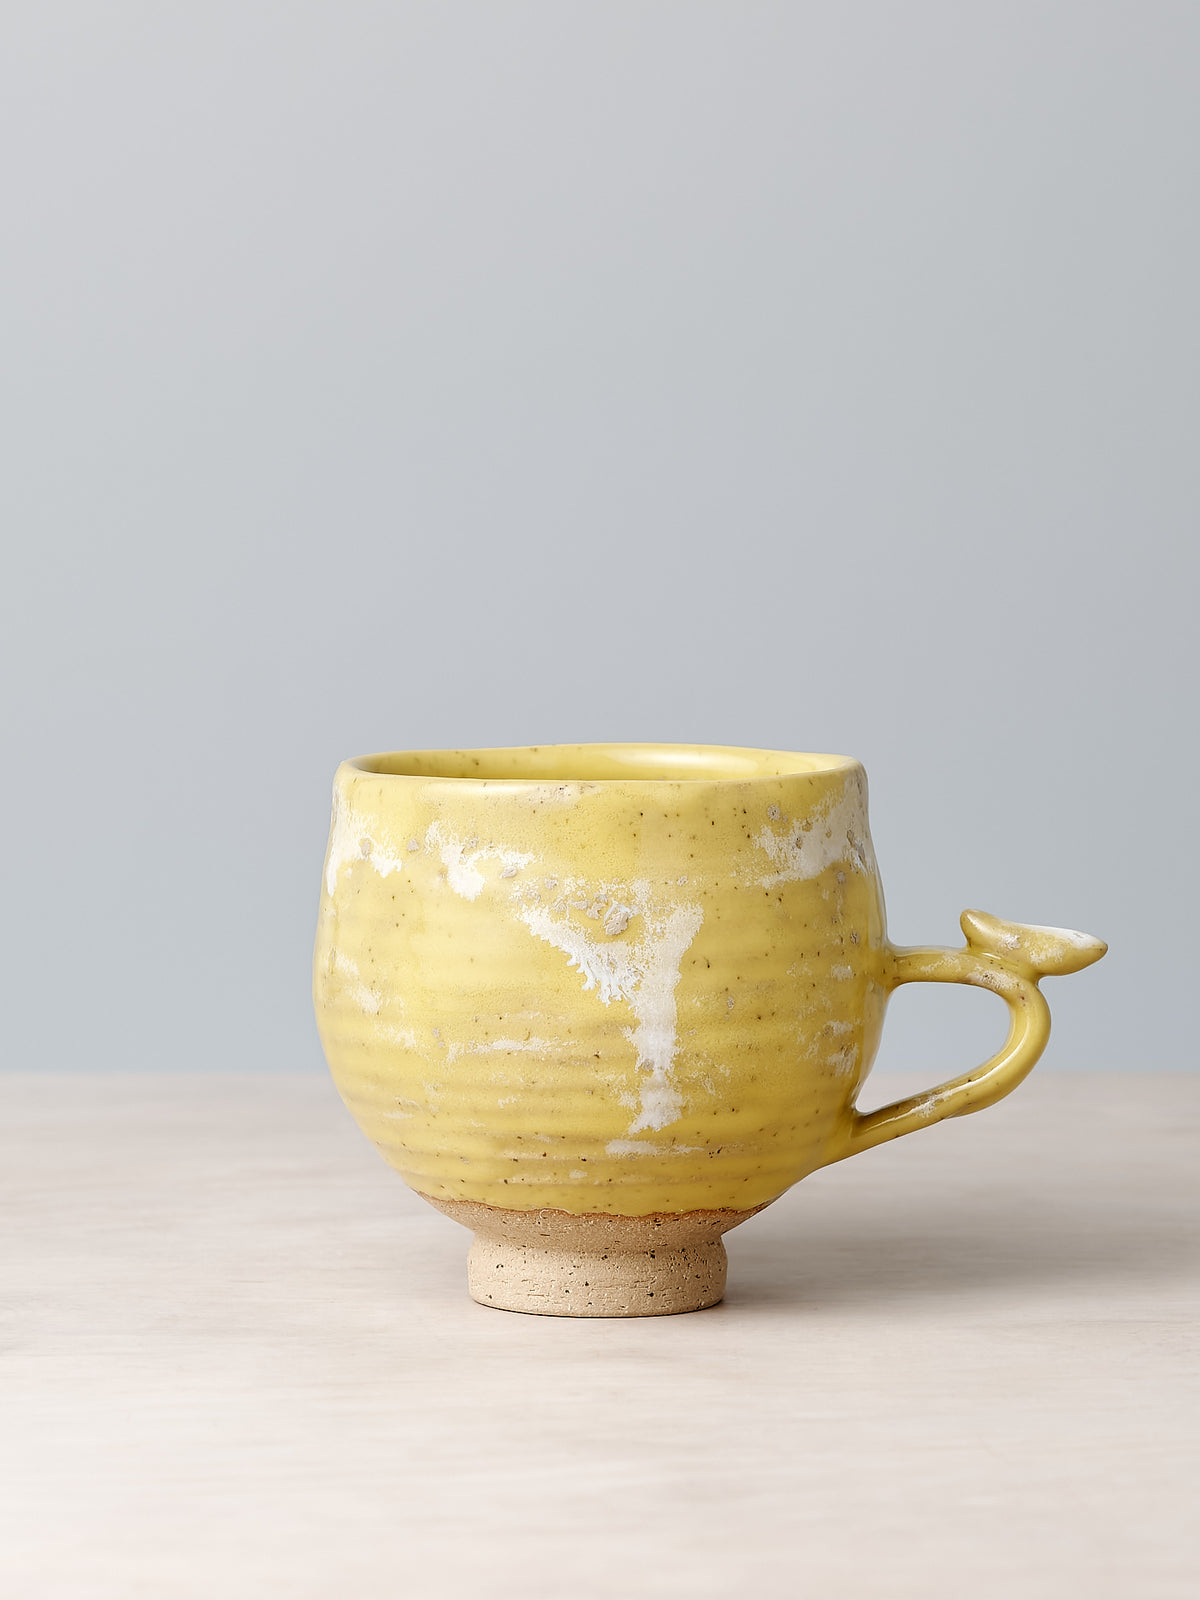 A Bird Handle Cup - Citrus by Jino Ceramic Studio sitting on a table.